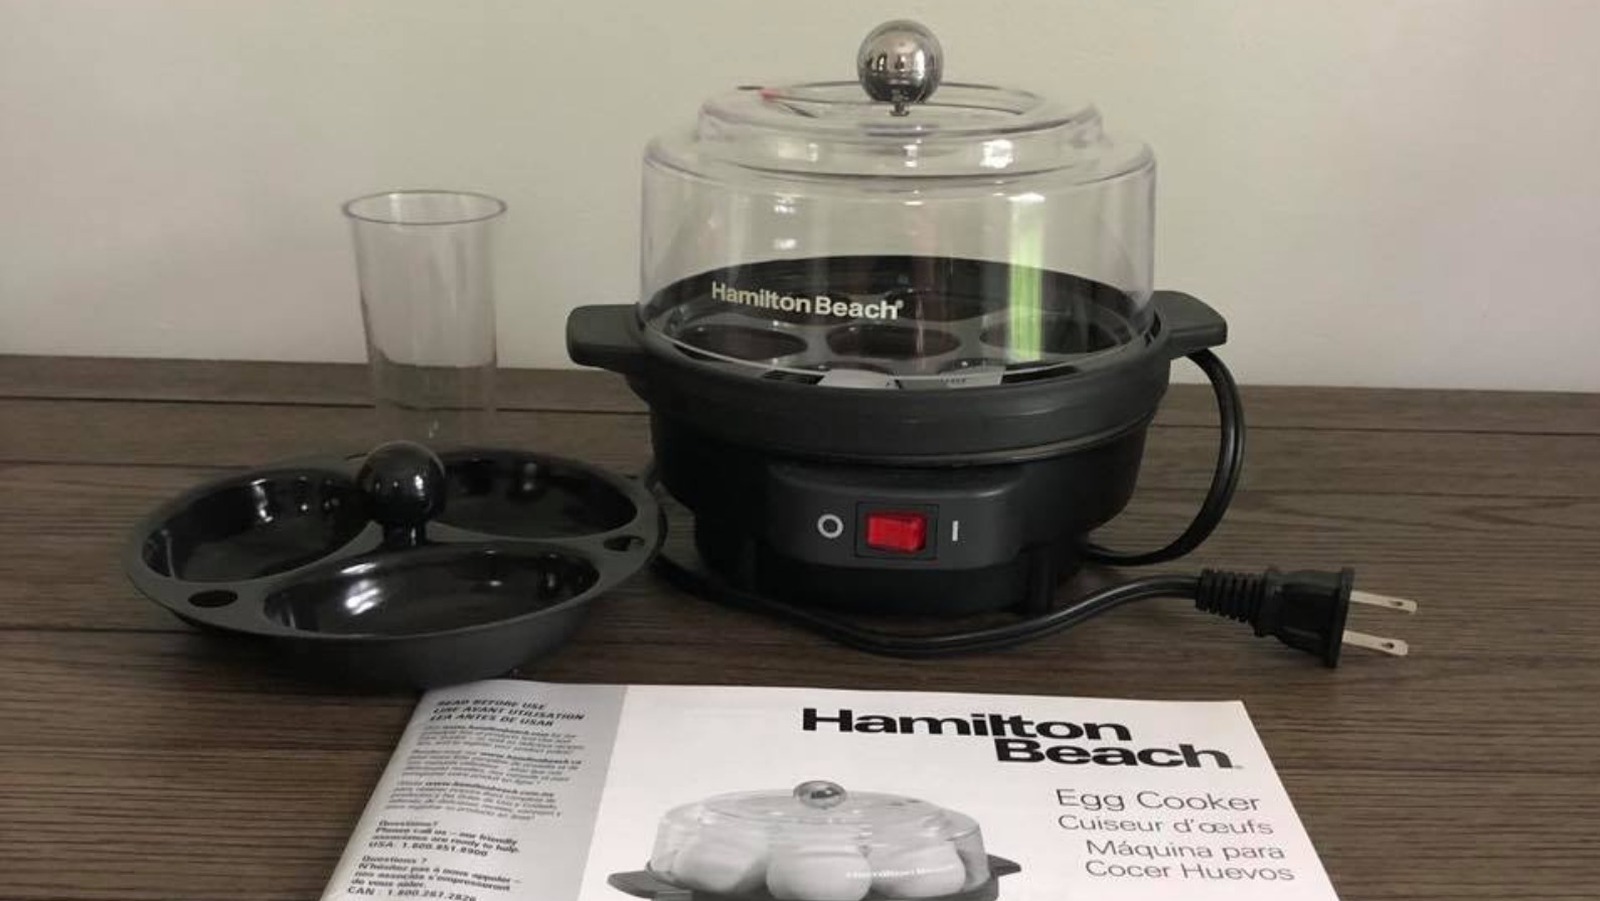 https://www.tastingtable.com/img/gallery/the-8-absolute-best-uses-for-your-egg-cooker/l-intro-1670429952.jpg